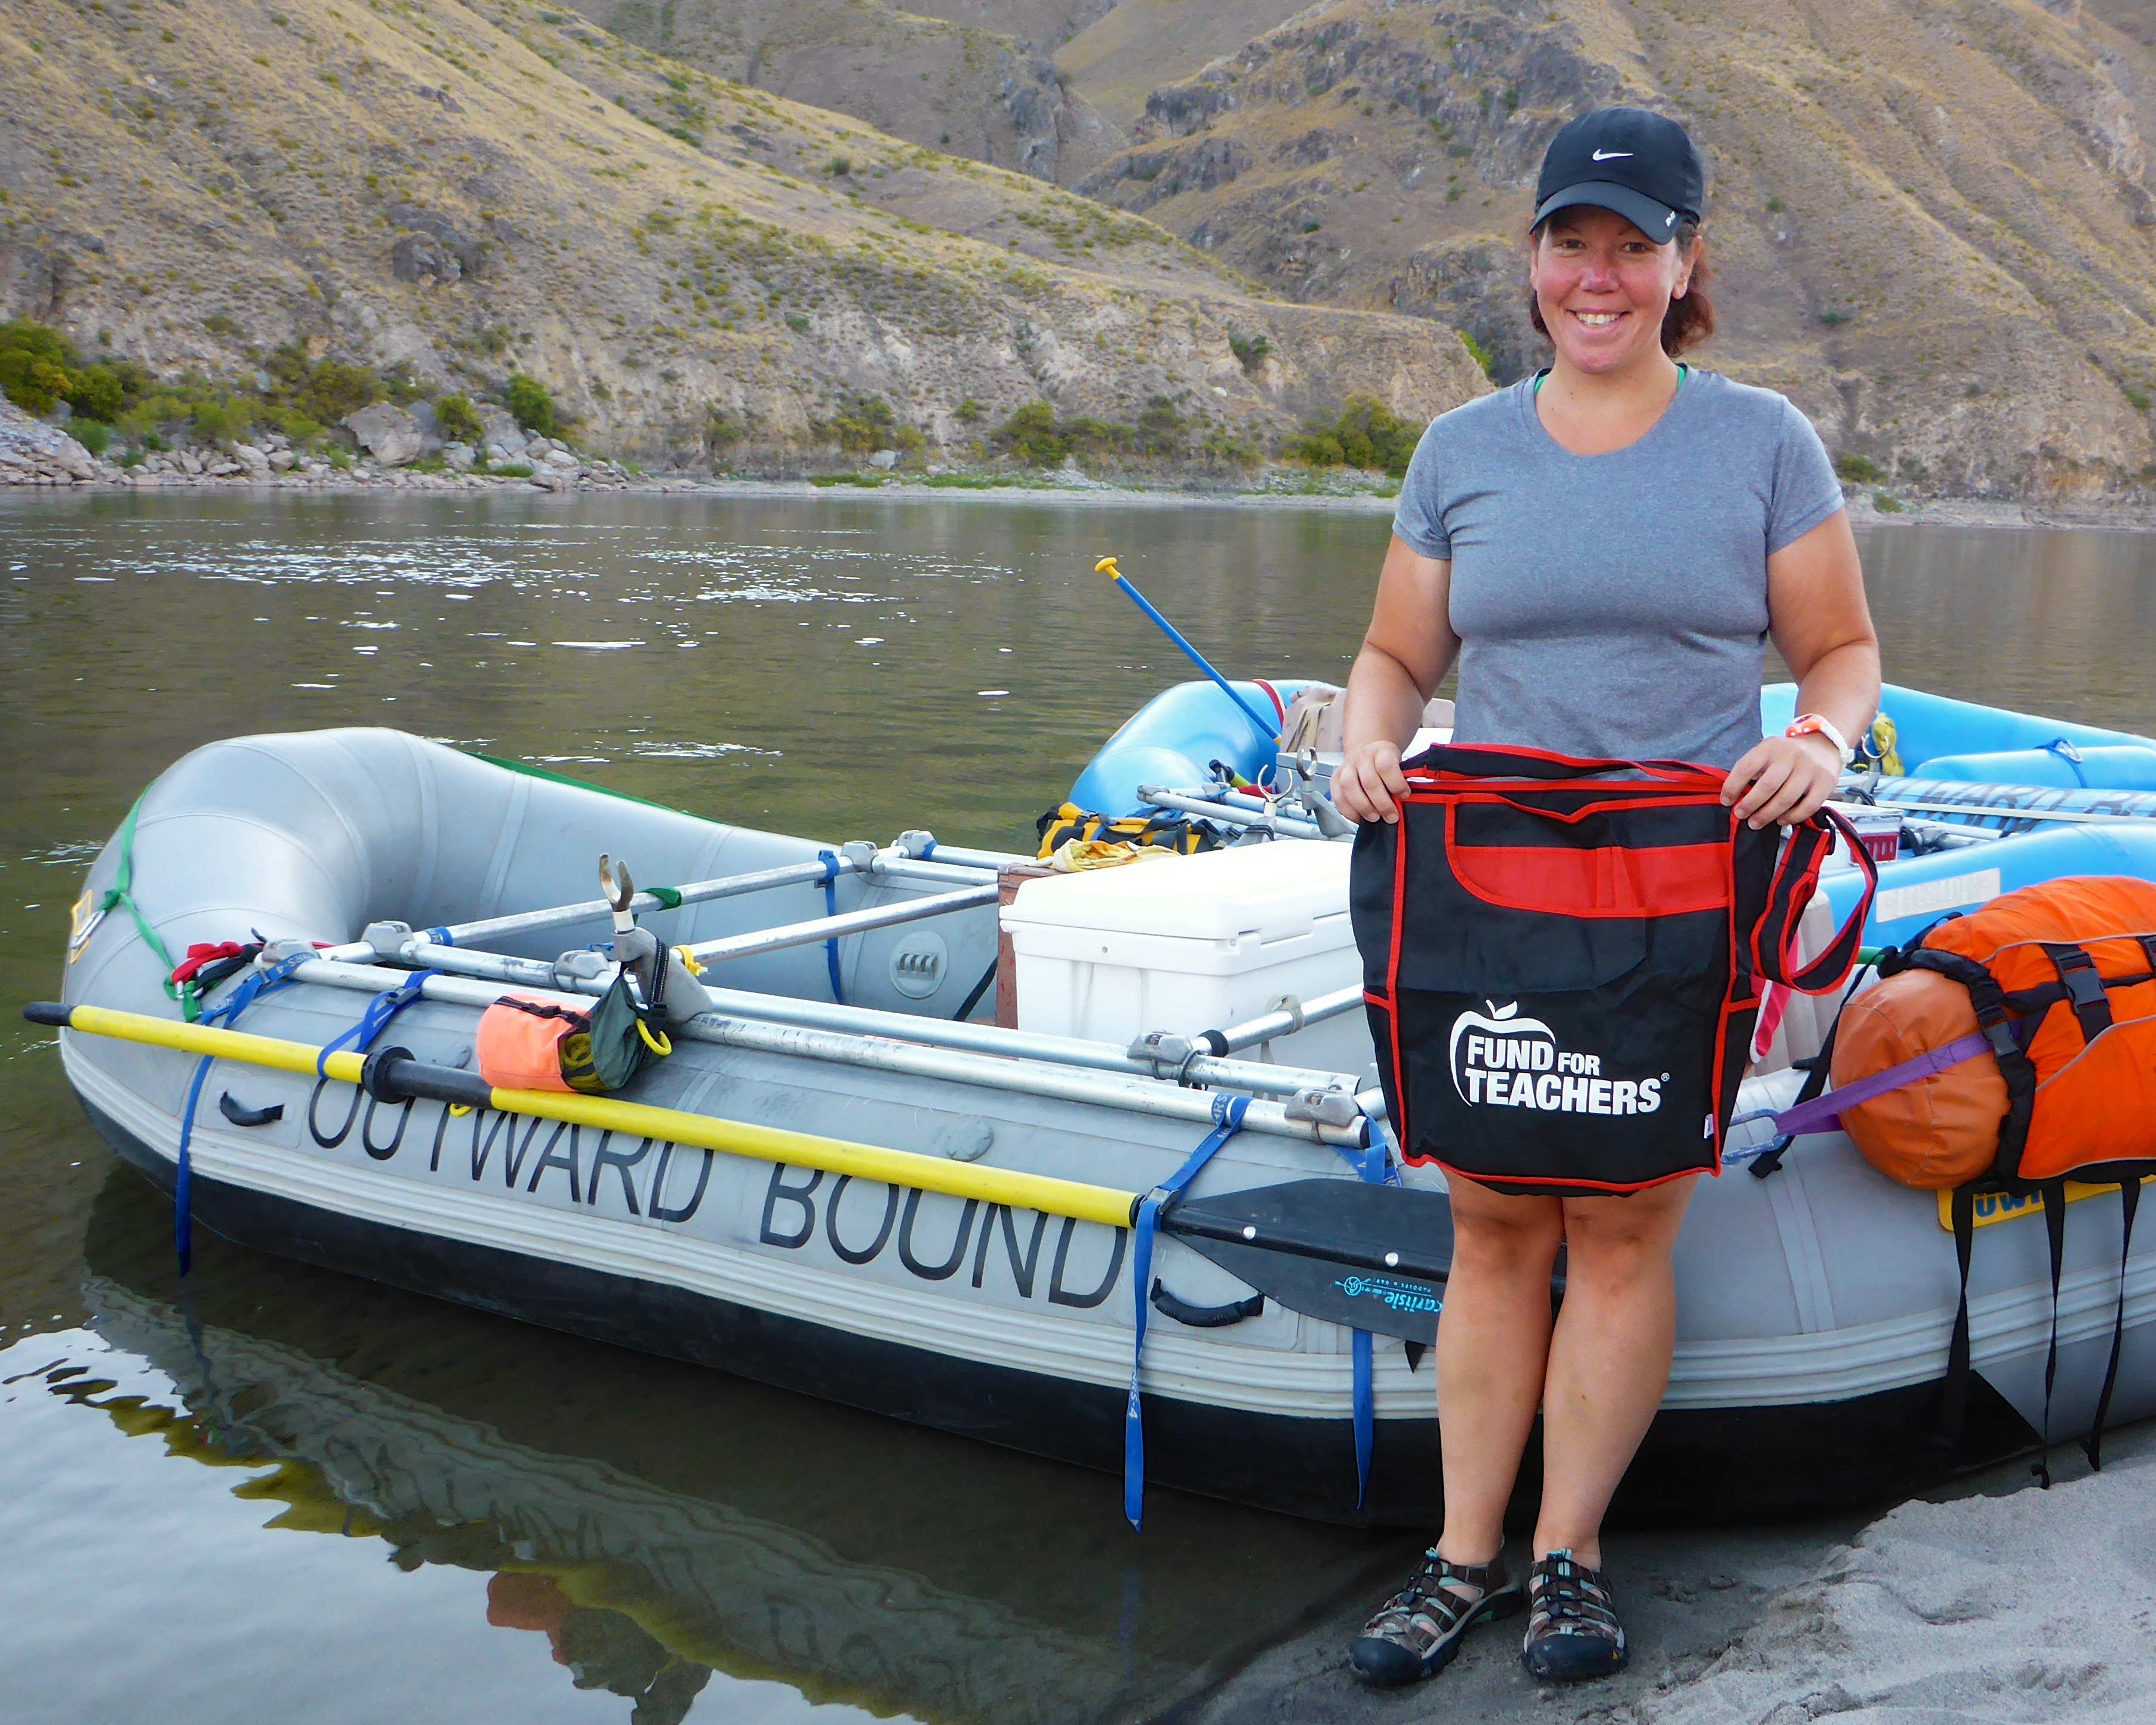 Russo on her FFT fellowship on the Salmon River